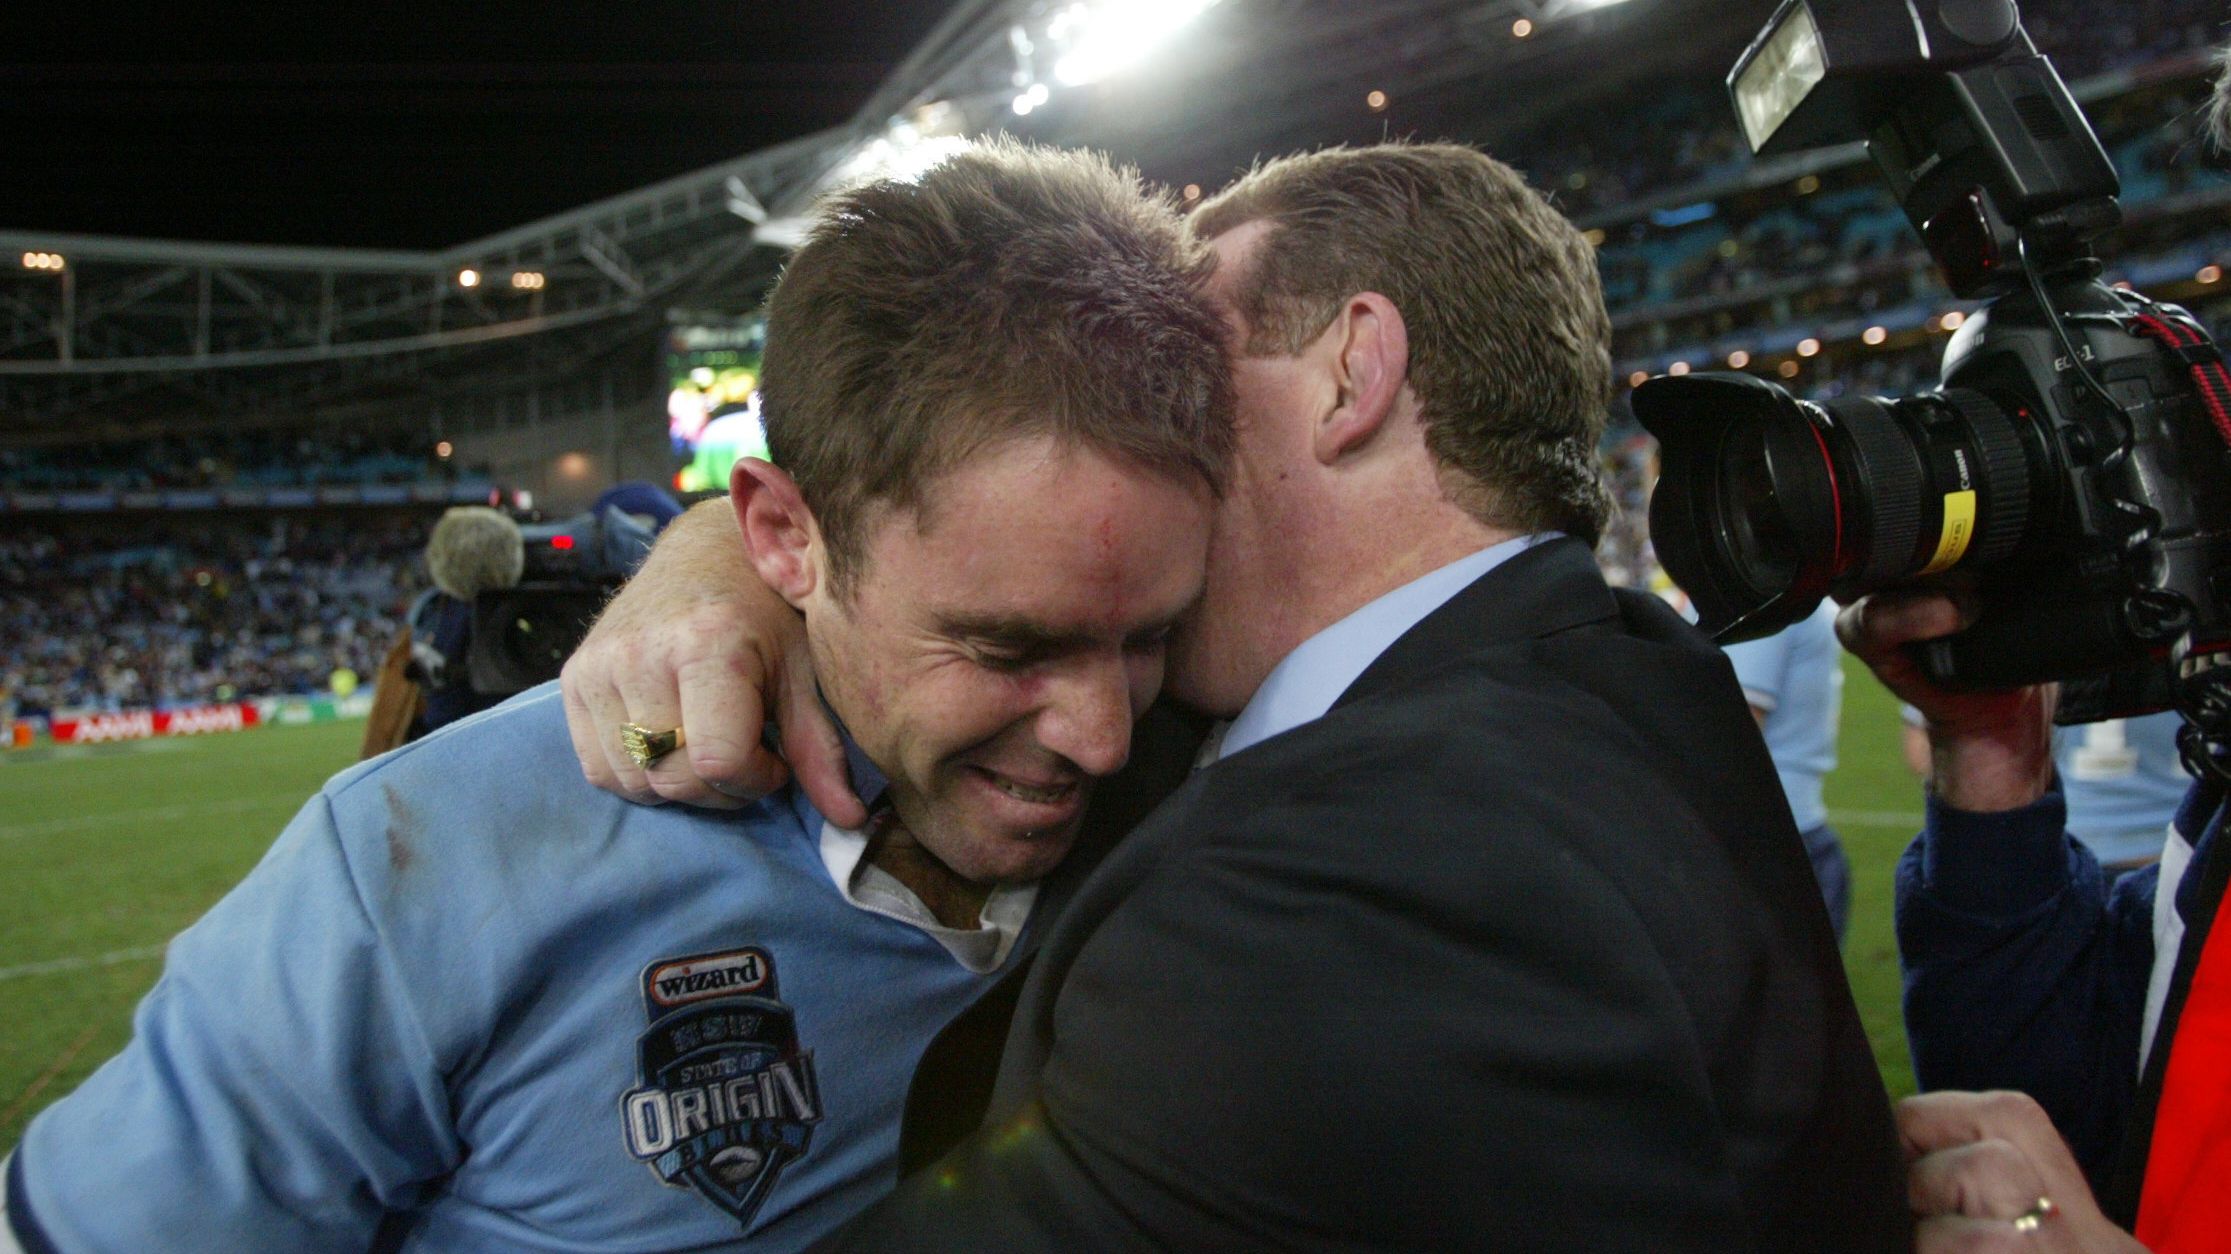 NSW coach Phil Gould hugs Brad Fittler after the NSW claimed victory in Origin III at Telstra Stadium, Wednesday 7 July 2004. Photo: Craig Golding